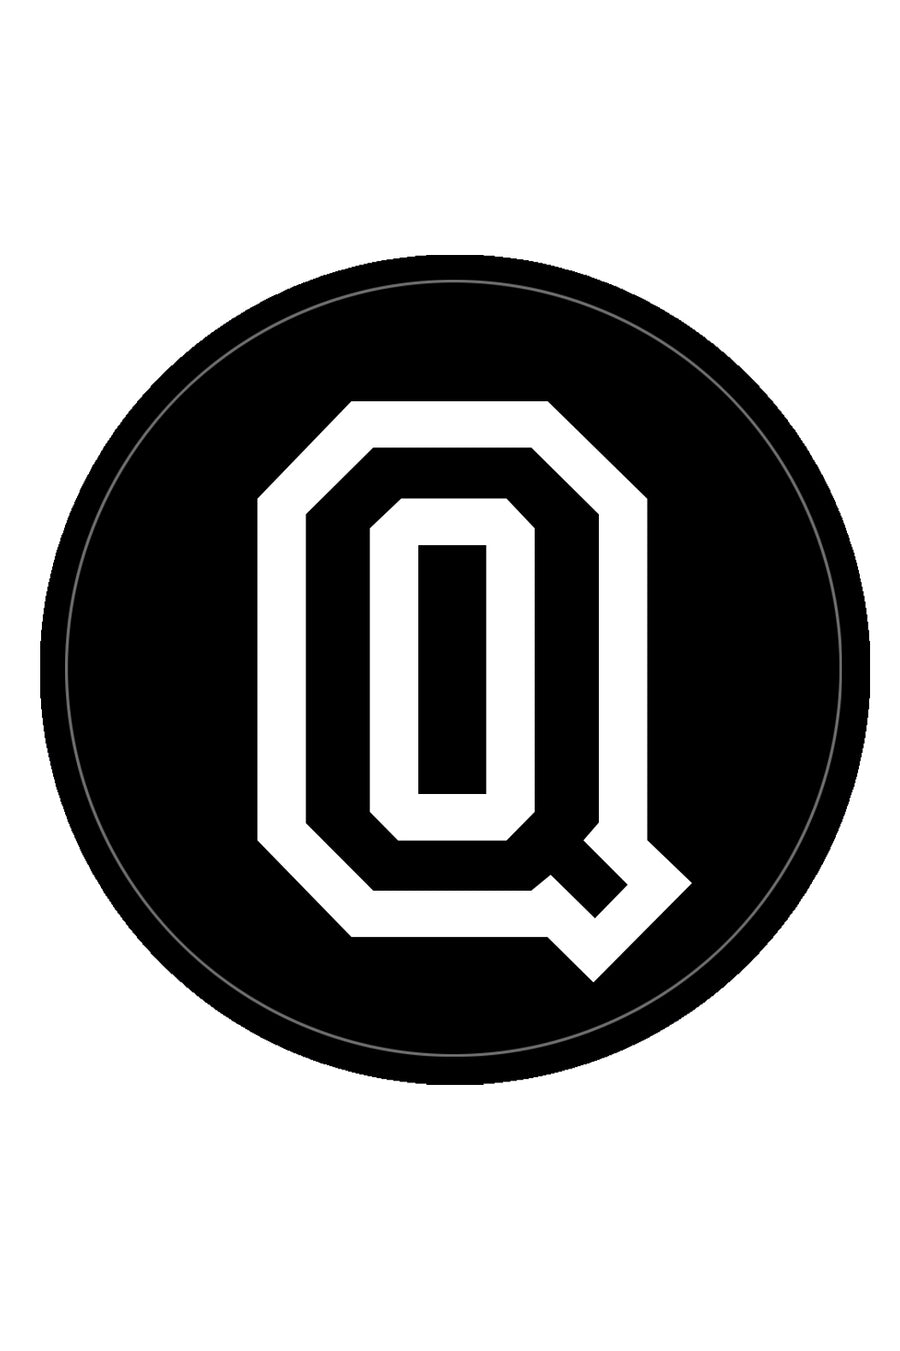 Velcro Initial Letter Q Patch